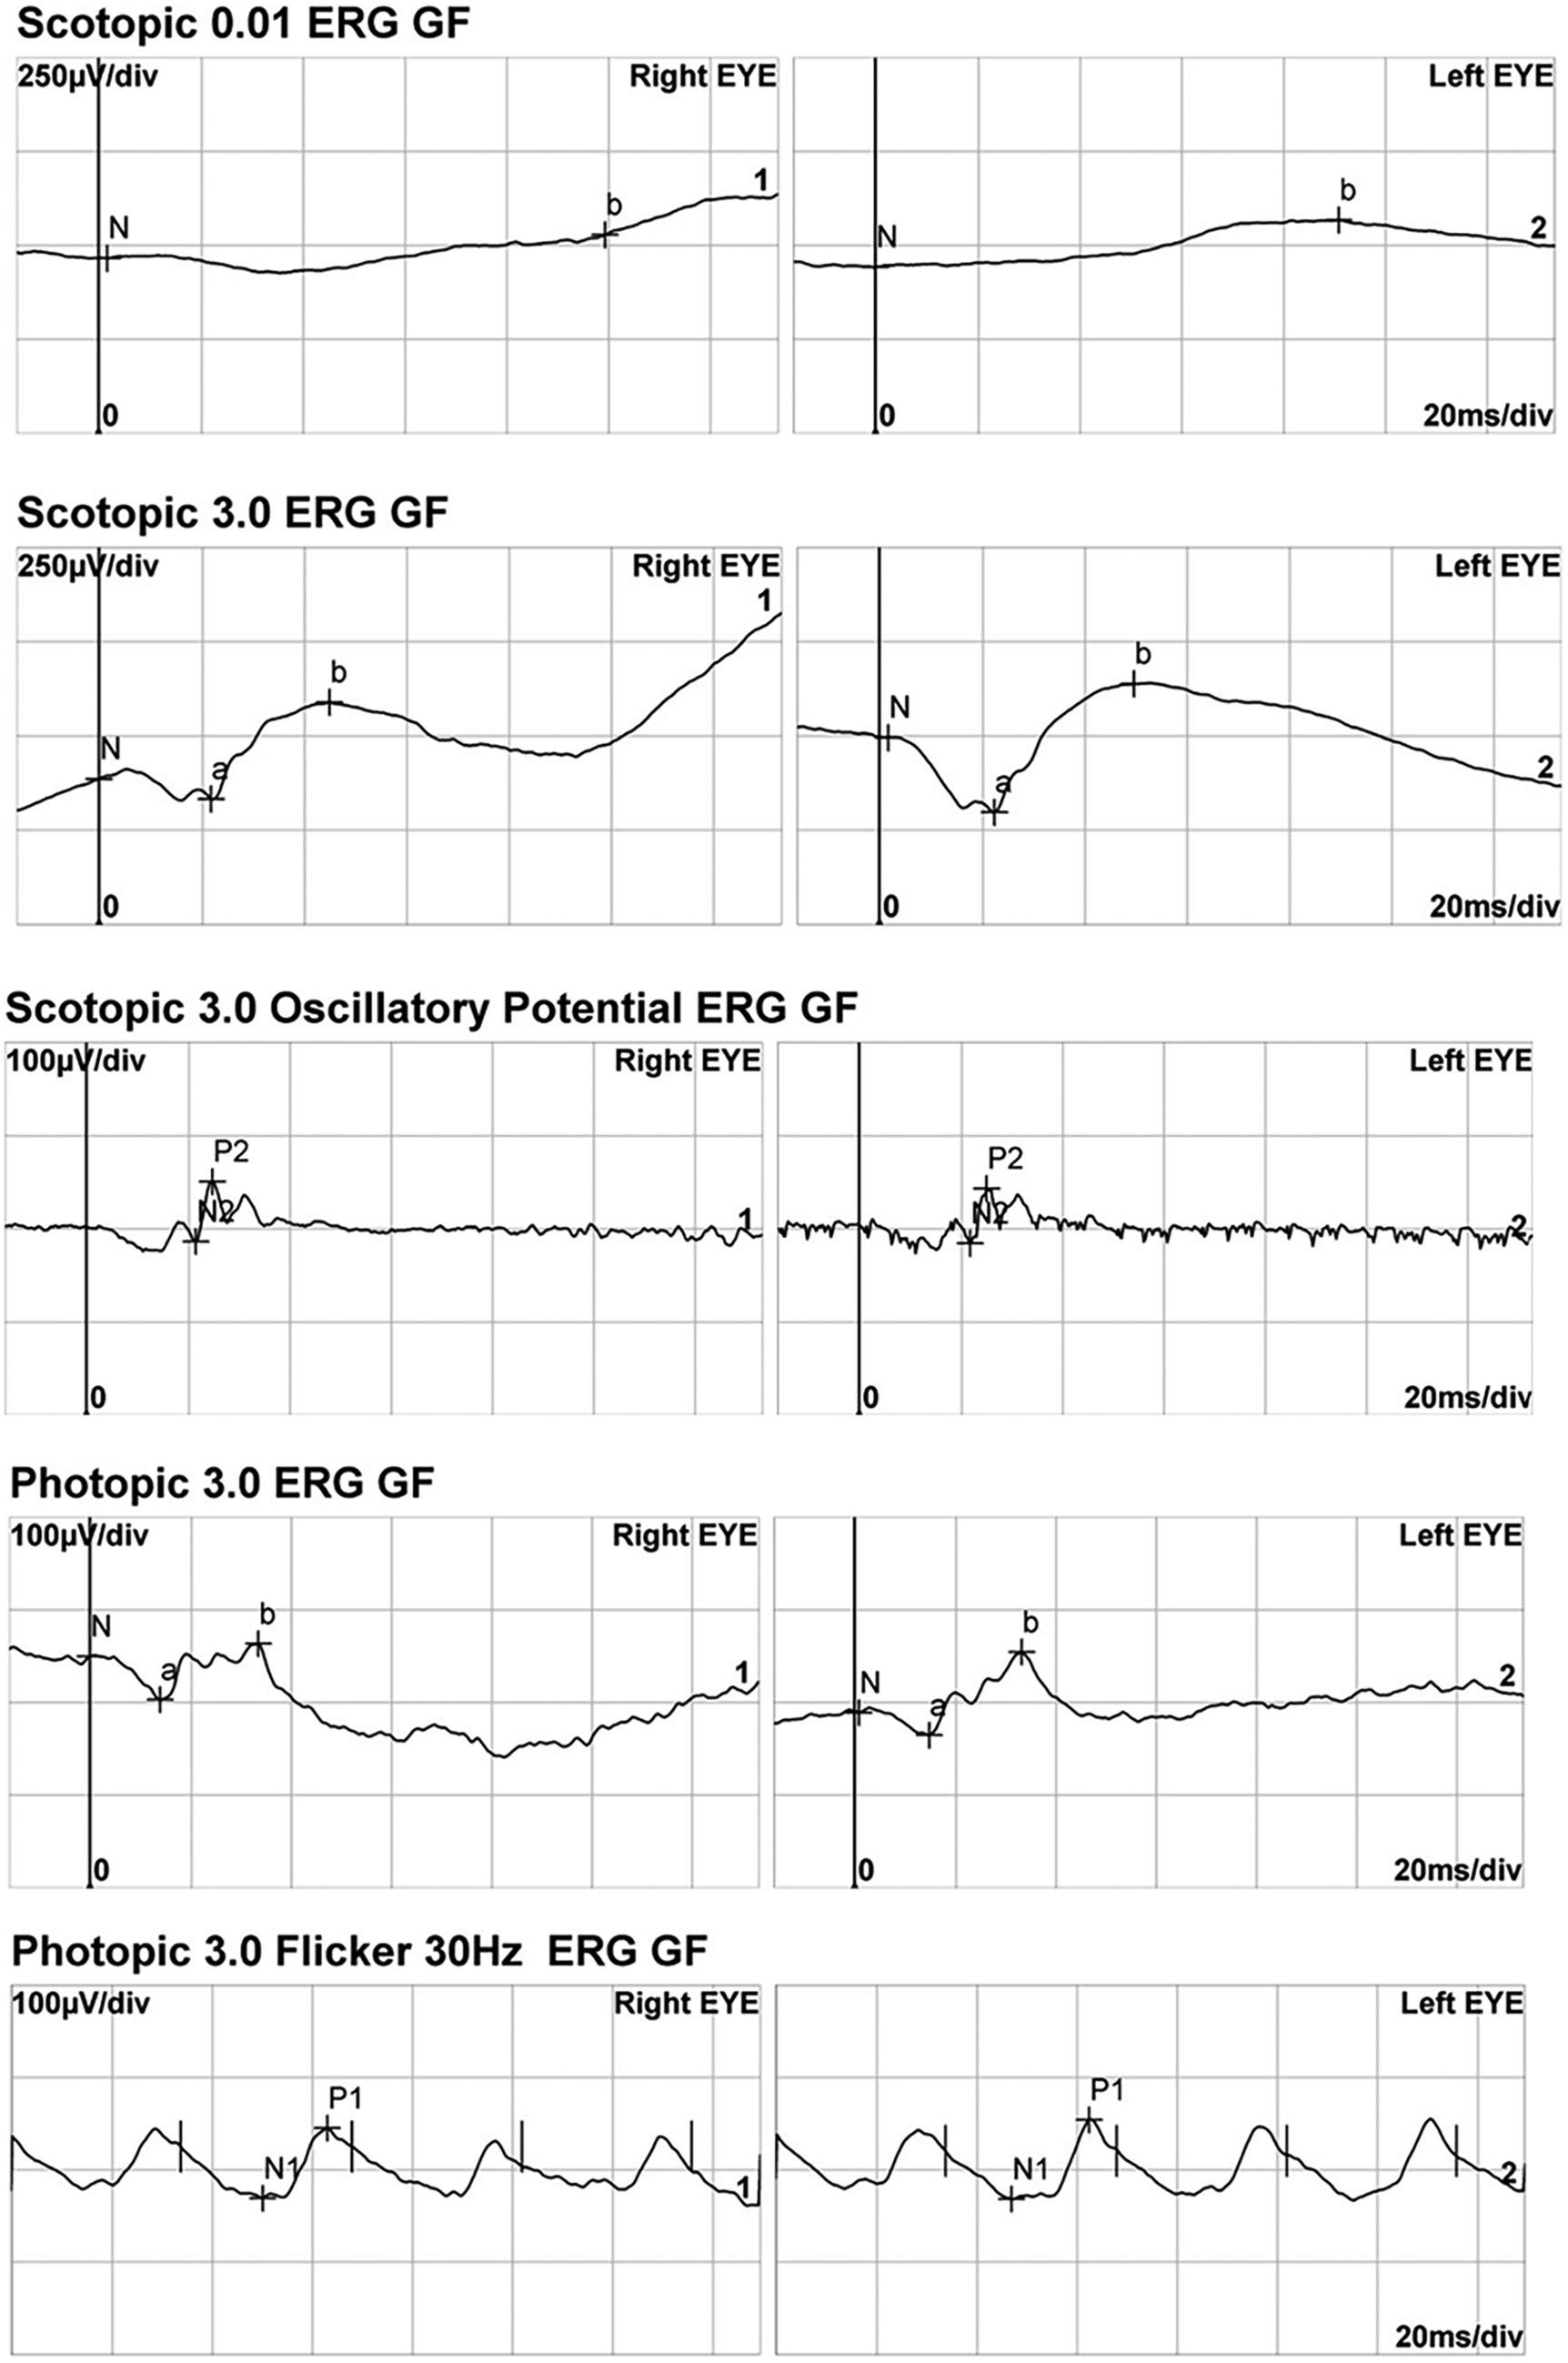 Electroretinography in congenital nystagmus patients with a normal fundus examination